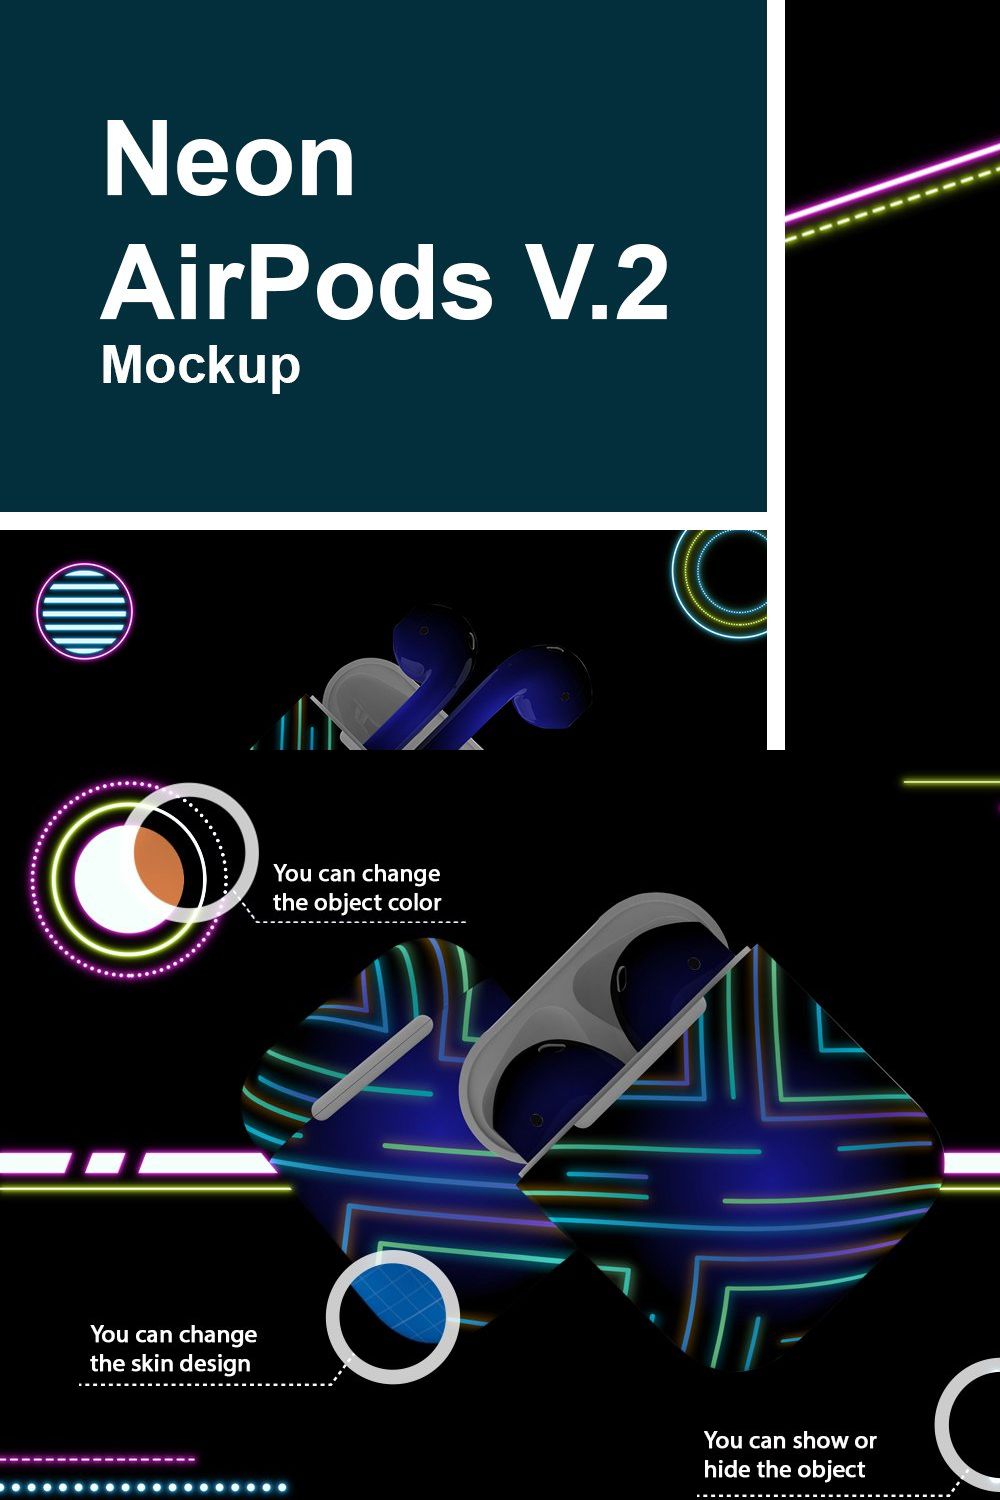 Neon Airpods mockup V.2 pinterest preview image.